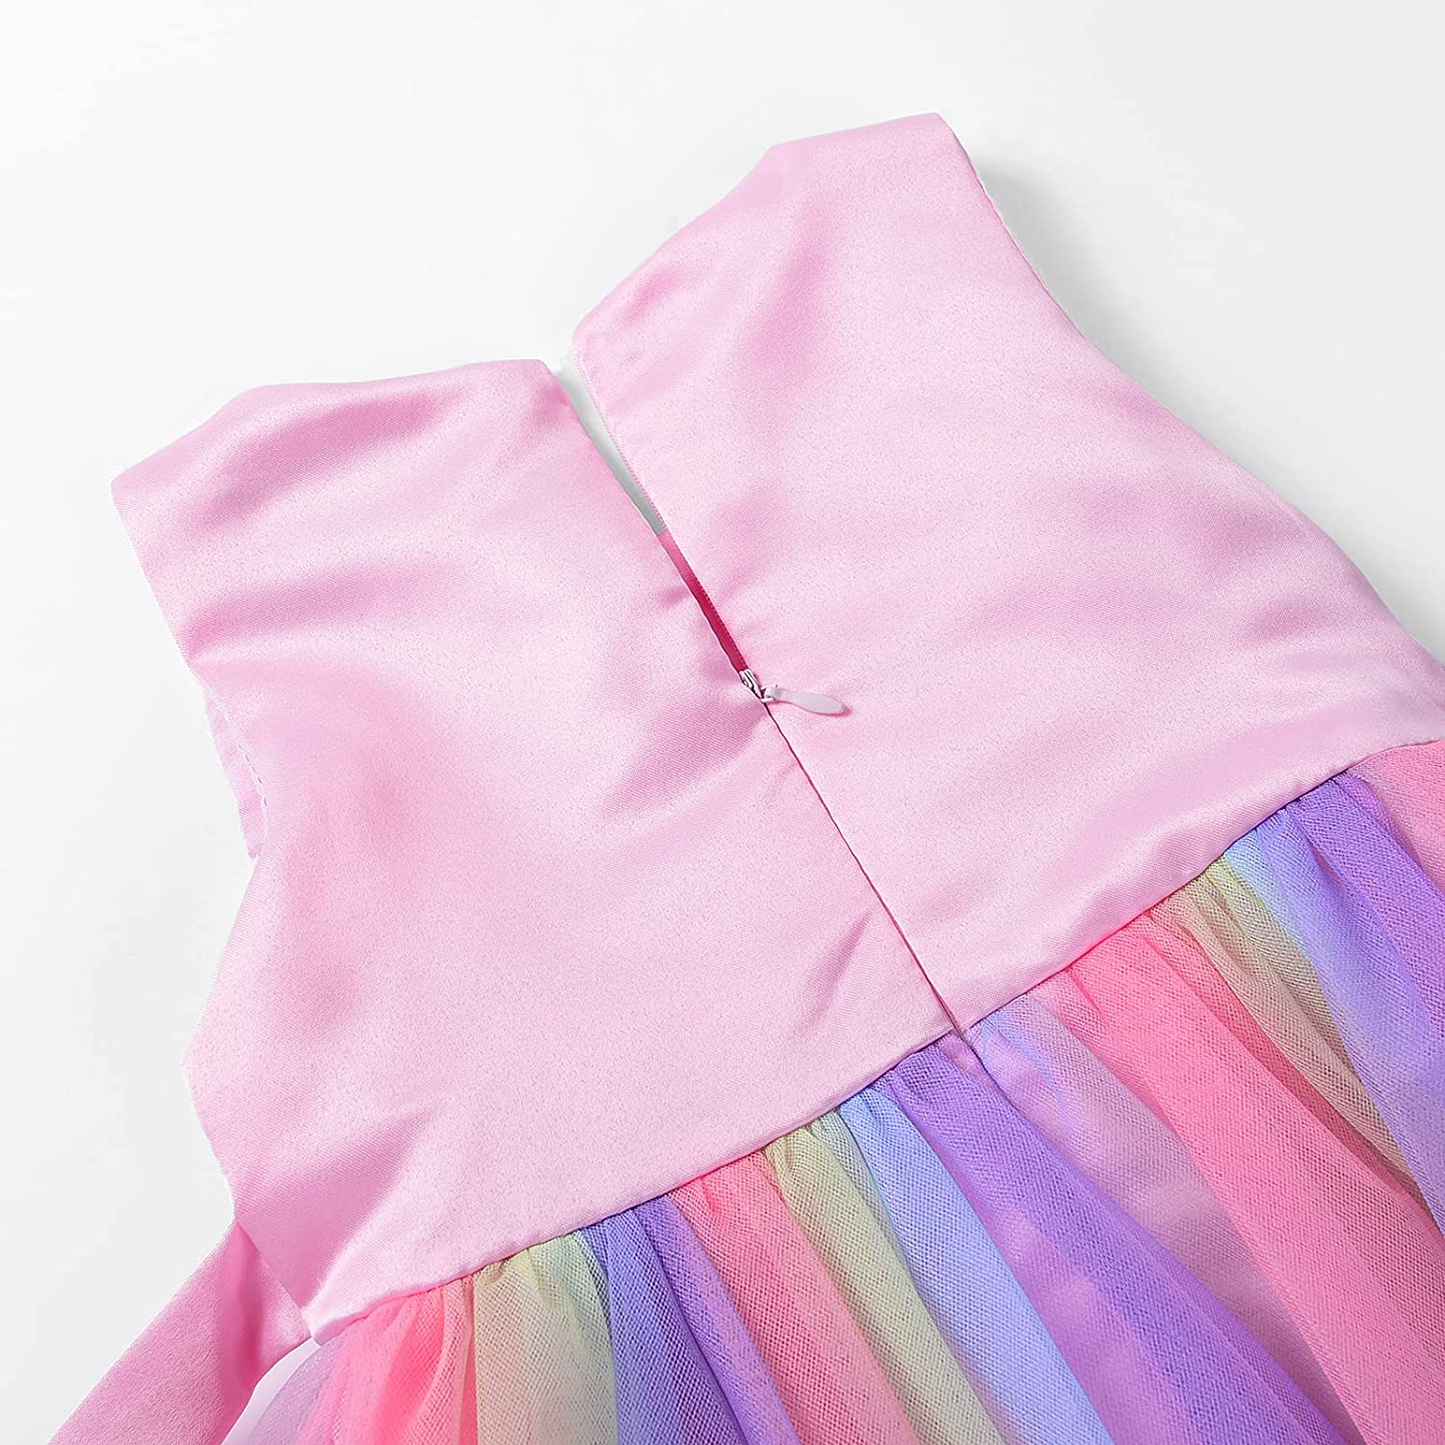 Sleeveless Tulle 3D Flower Rainbow Dress for Little Girls - Perfect for Weddings, Parties and Dress Up!